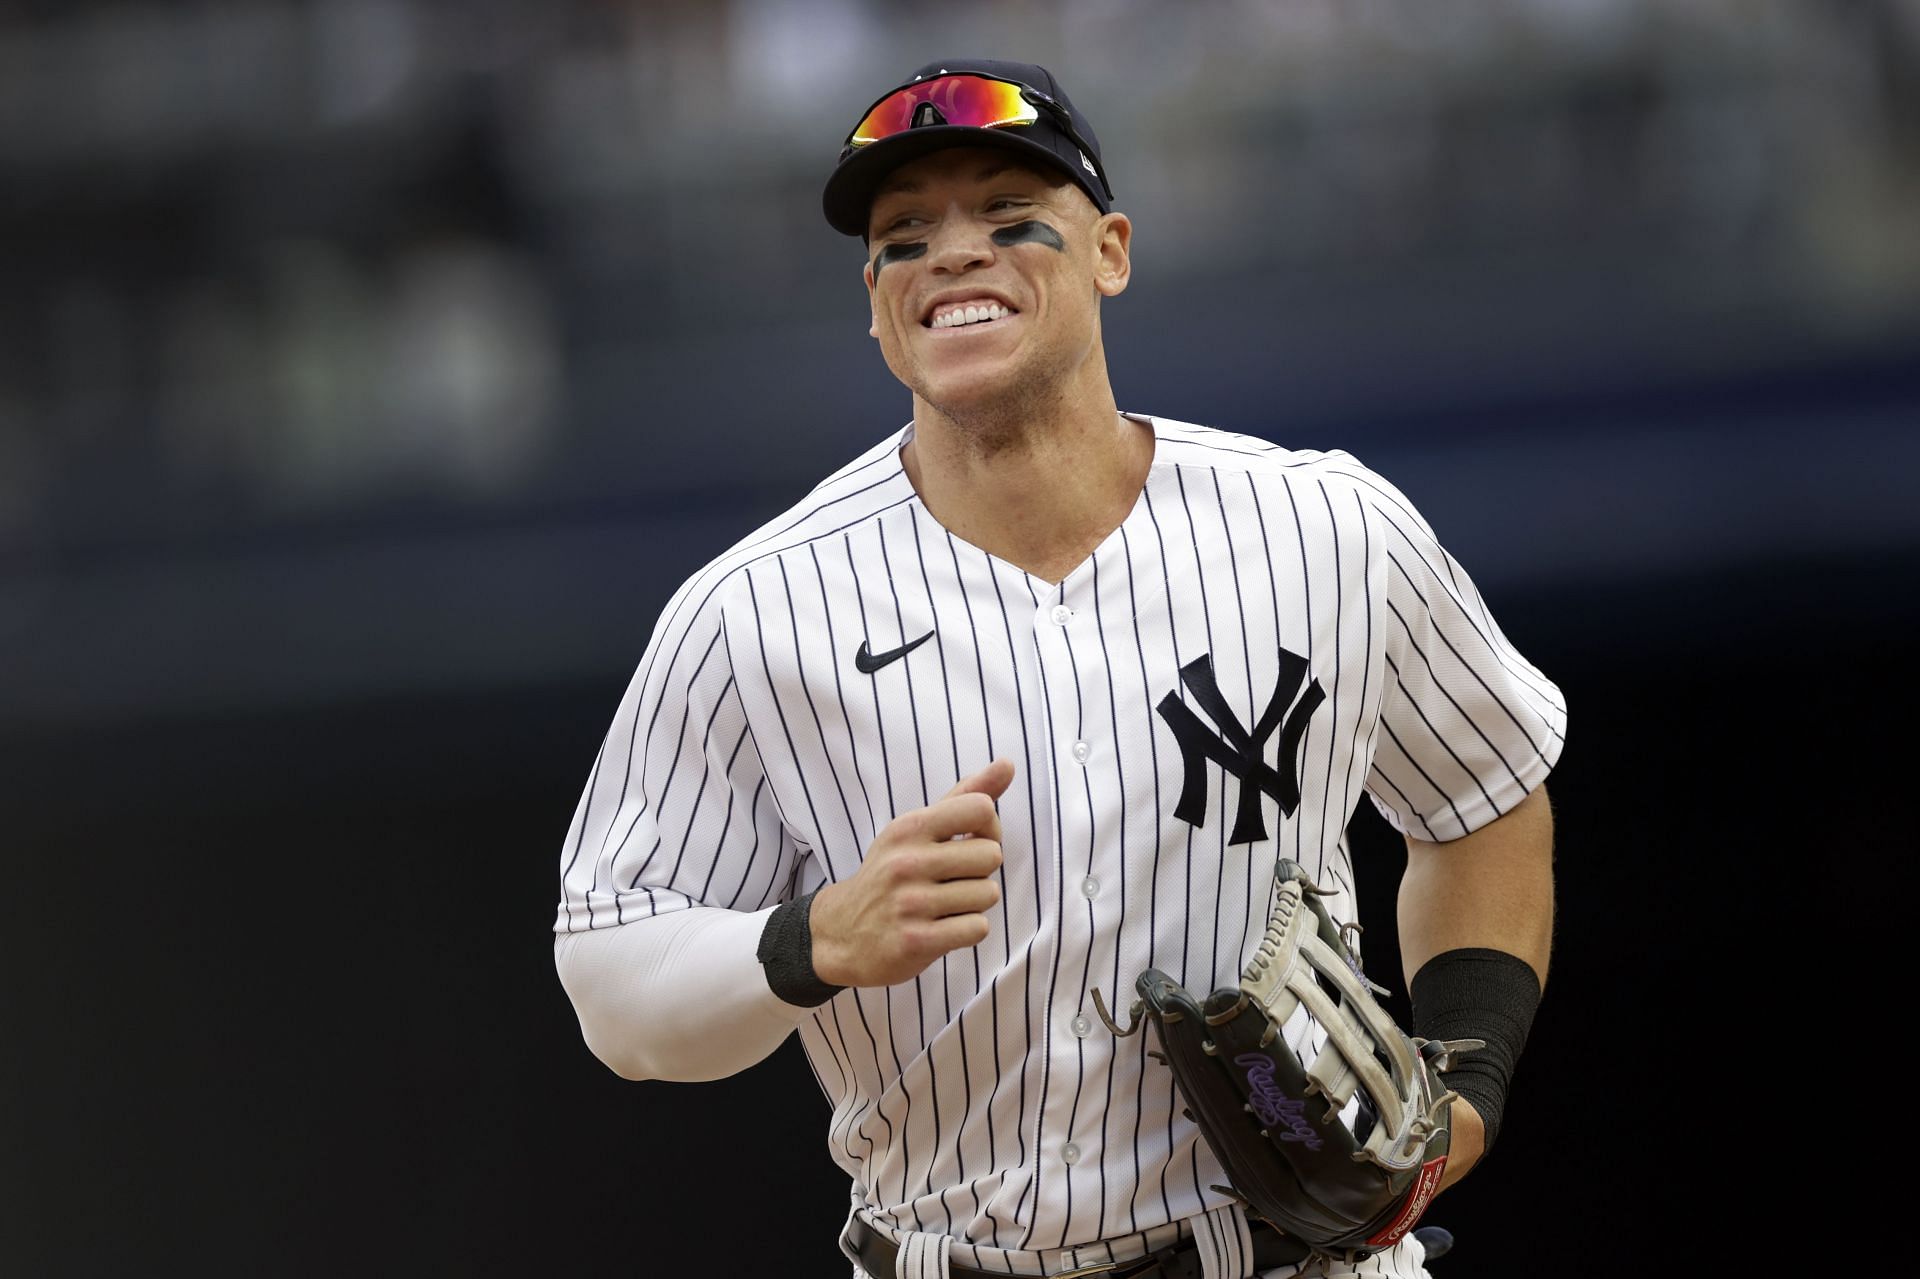 Aaron Judge runs back to the dugout during a Chicago Cubs v New York Yankees game.